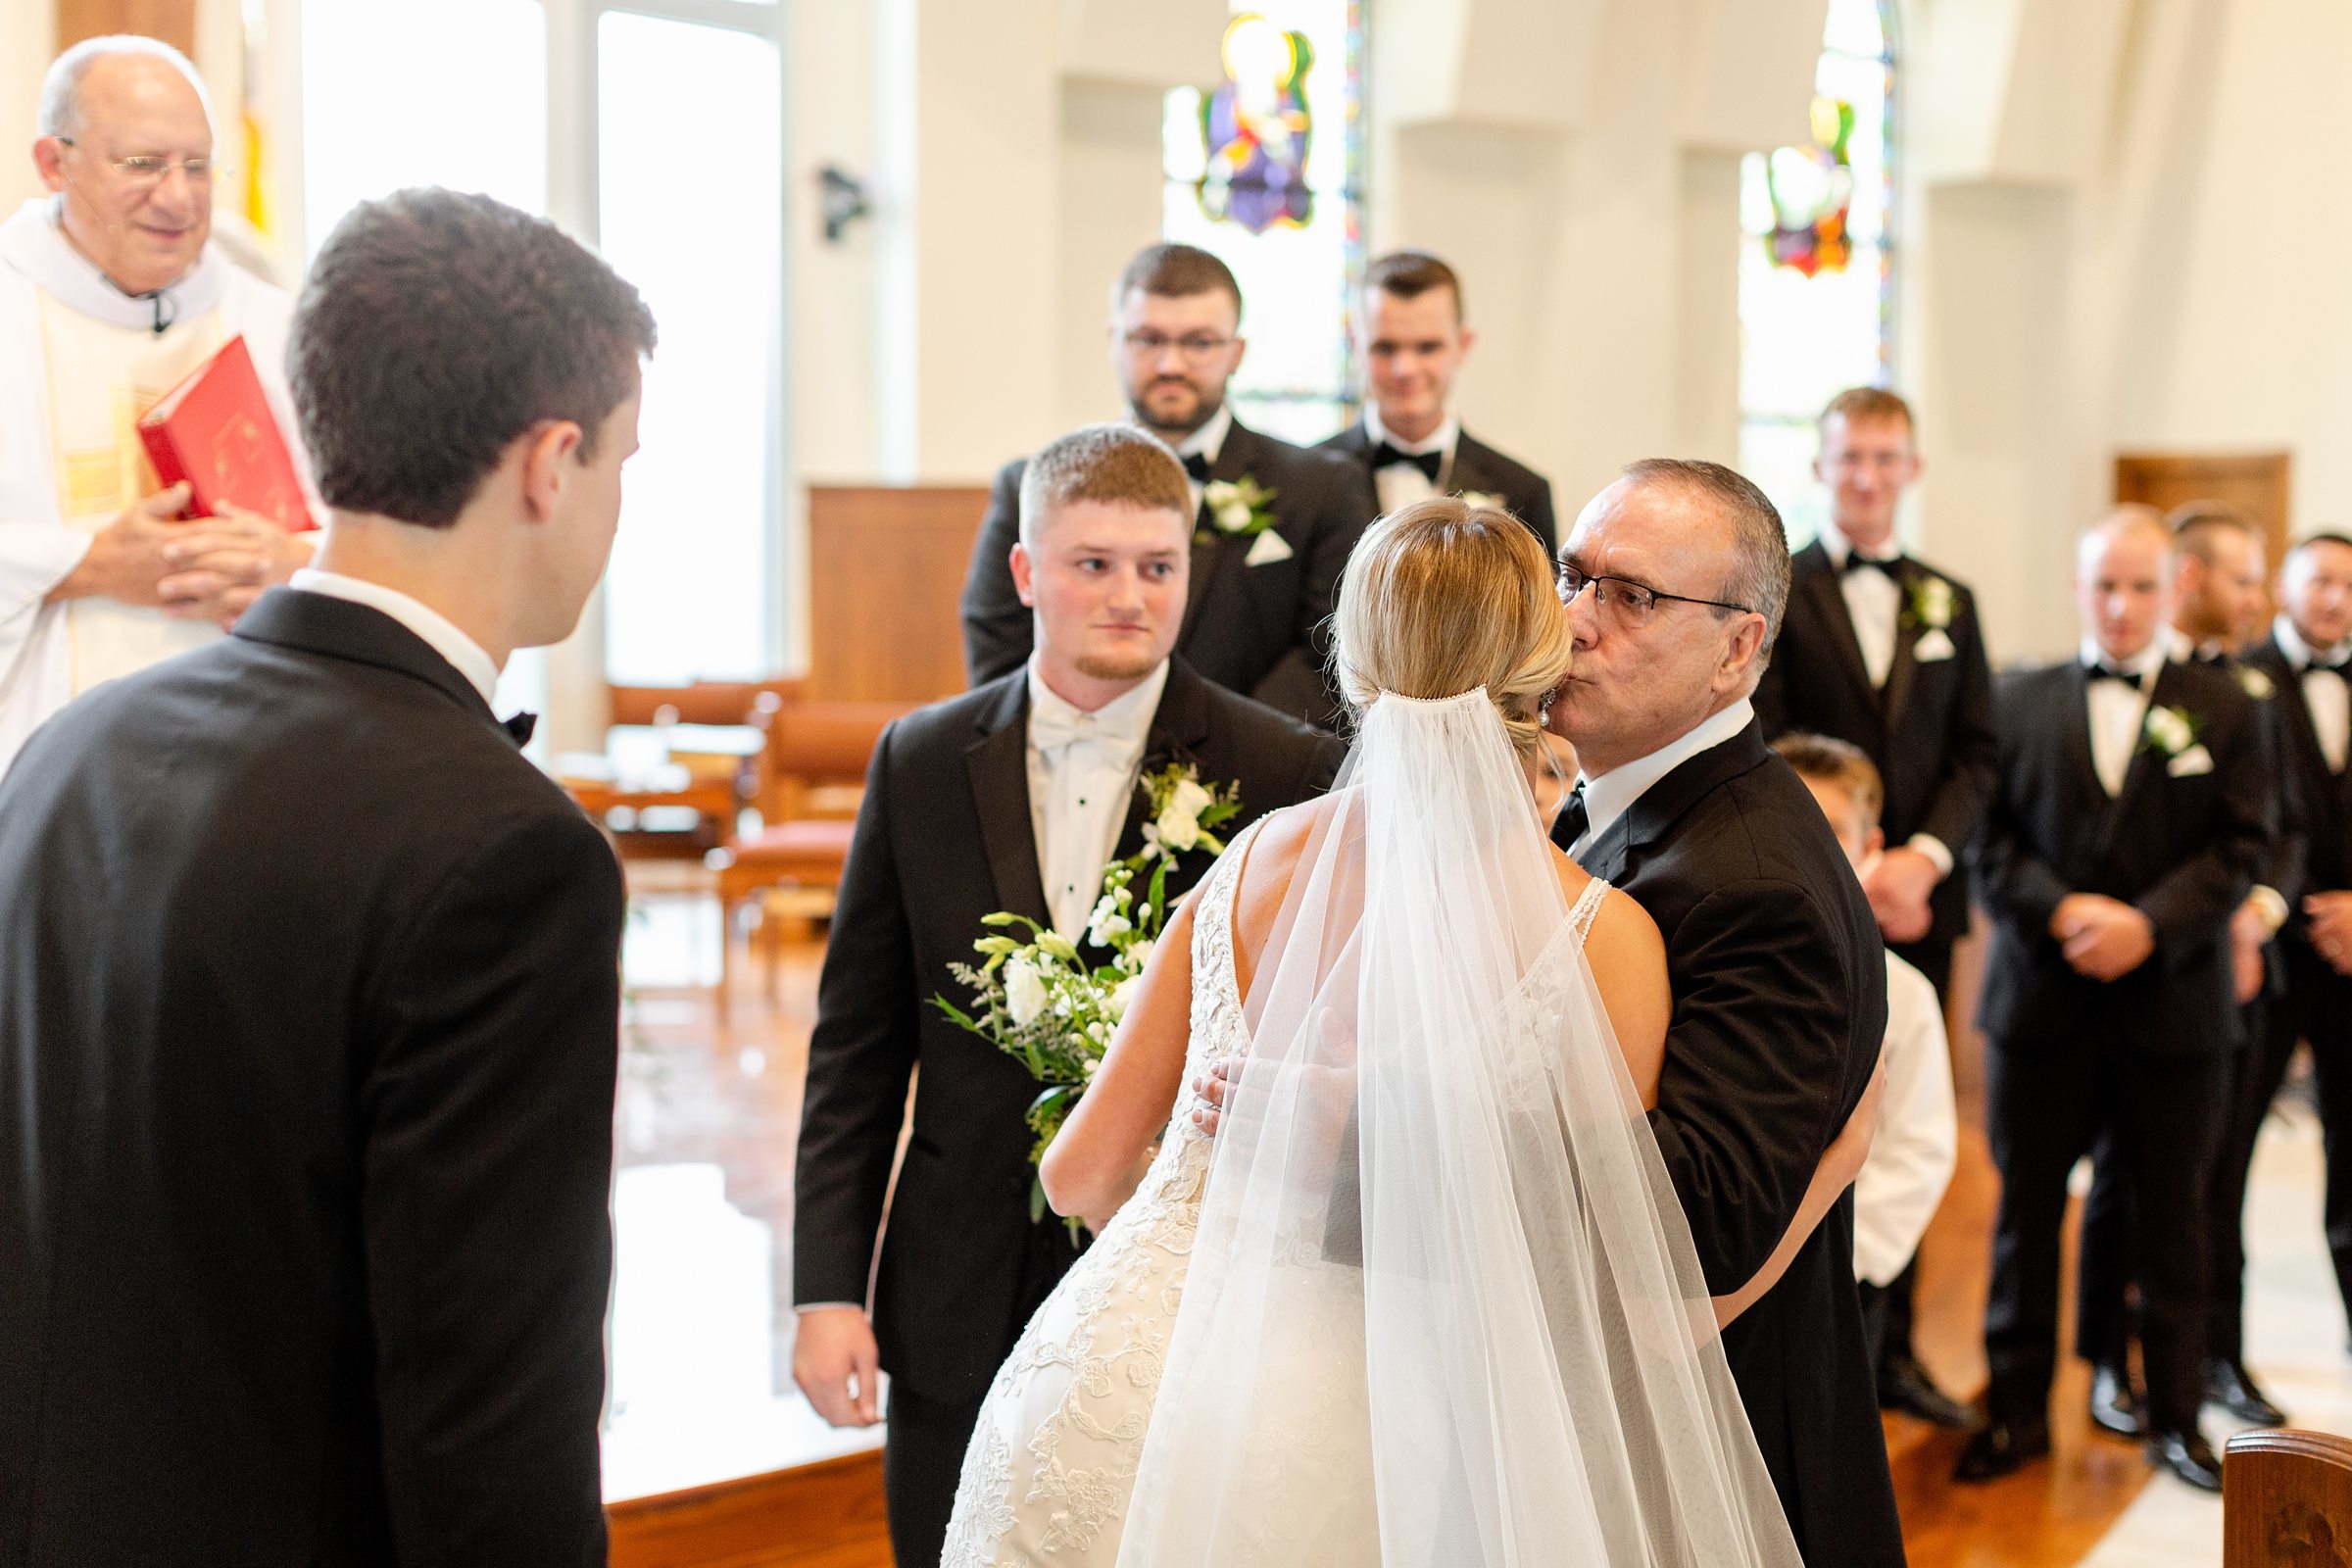 Hannah and Cody's Wedding in Booneville, IN139.jpg